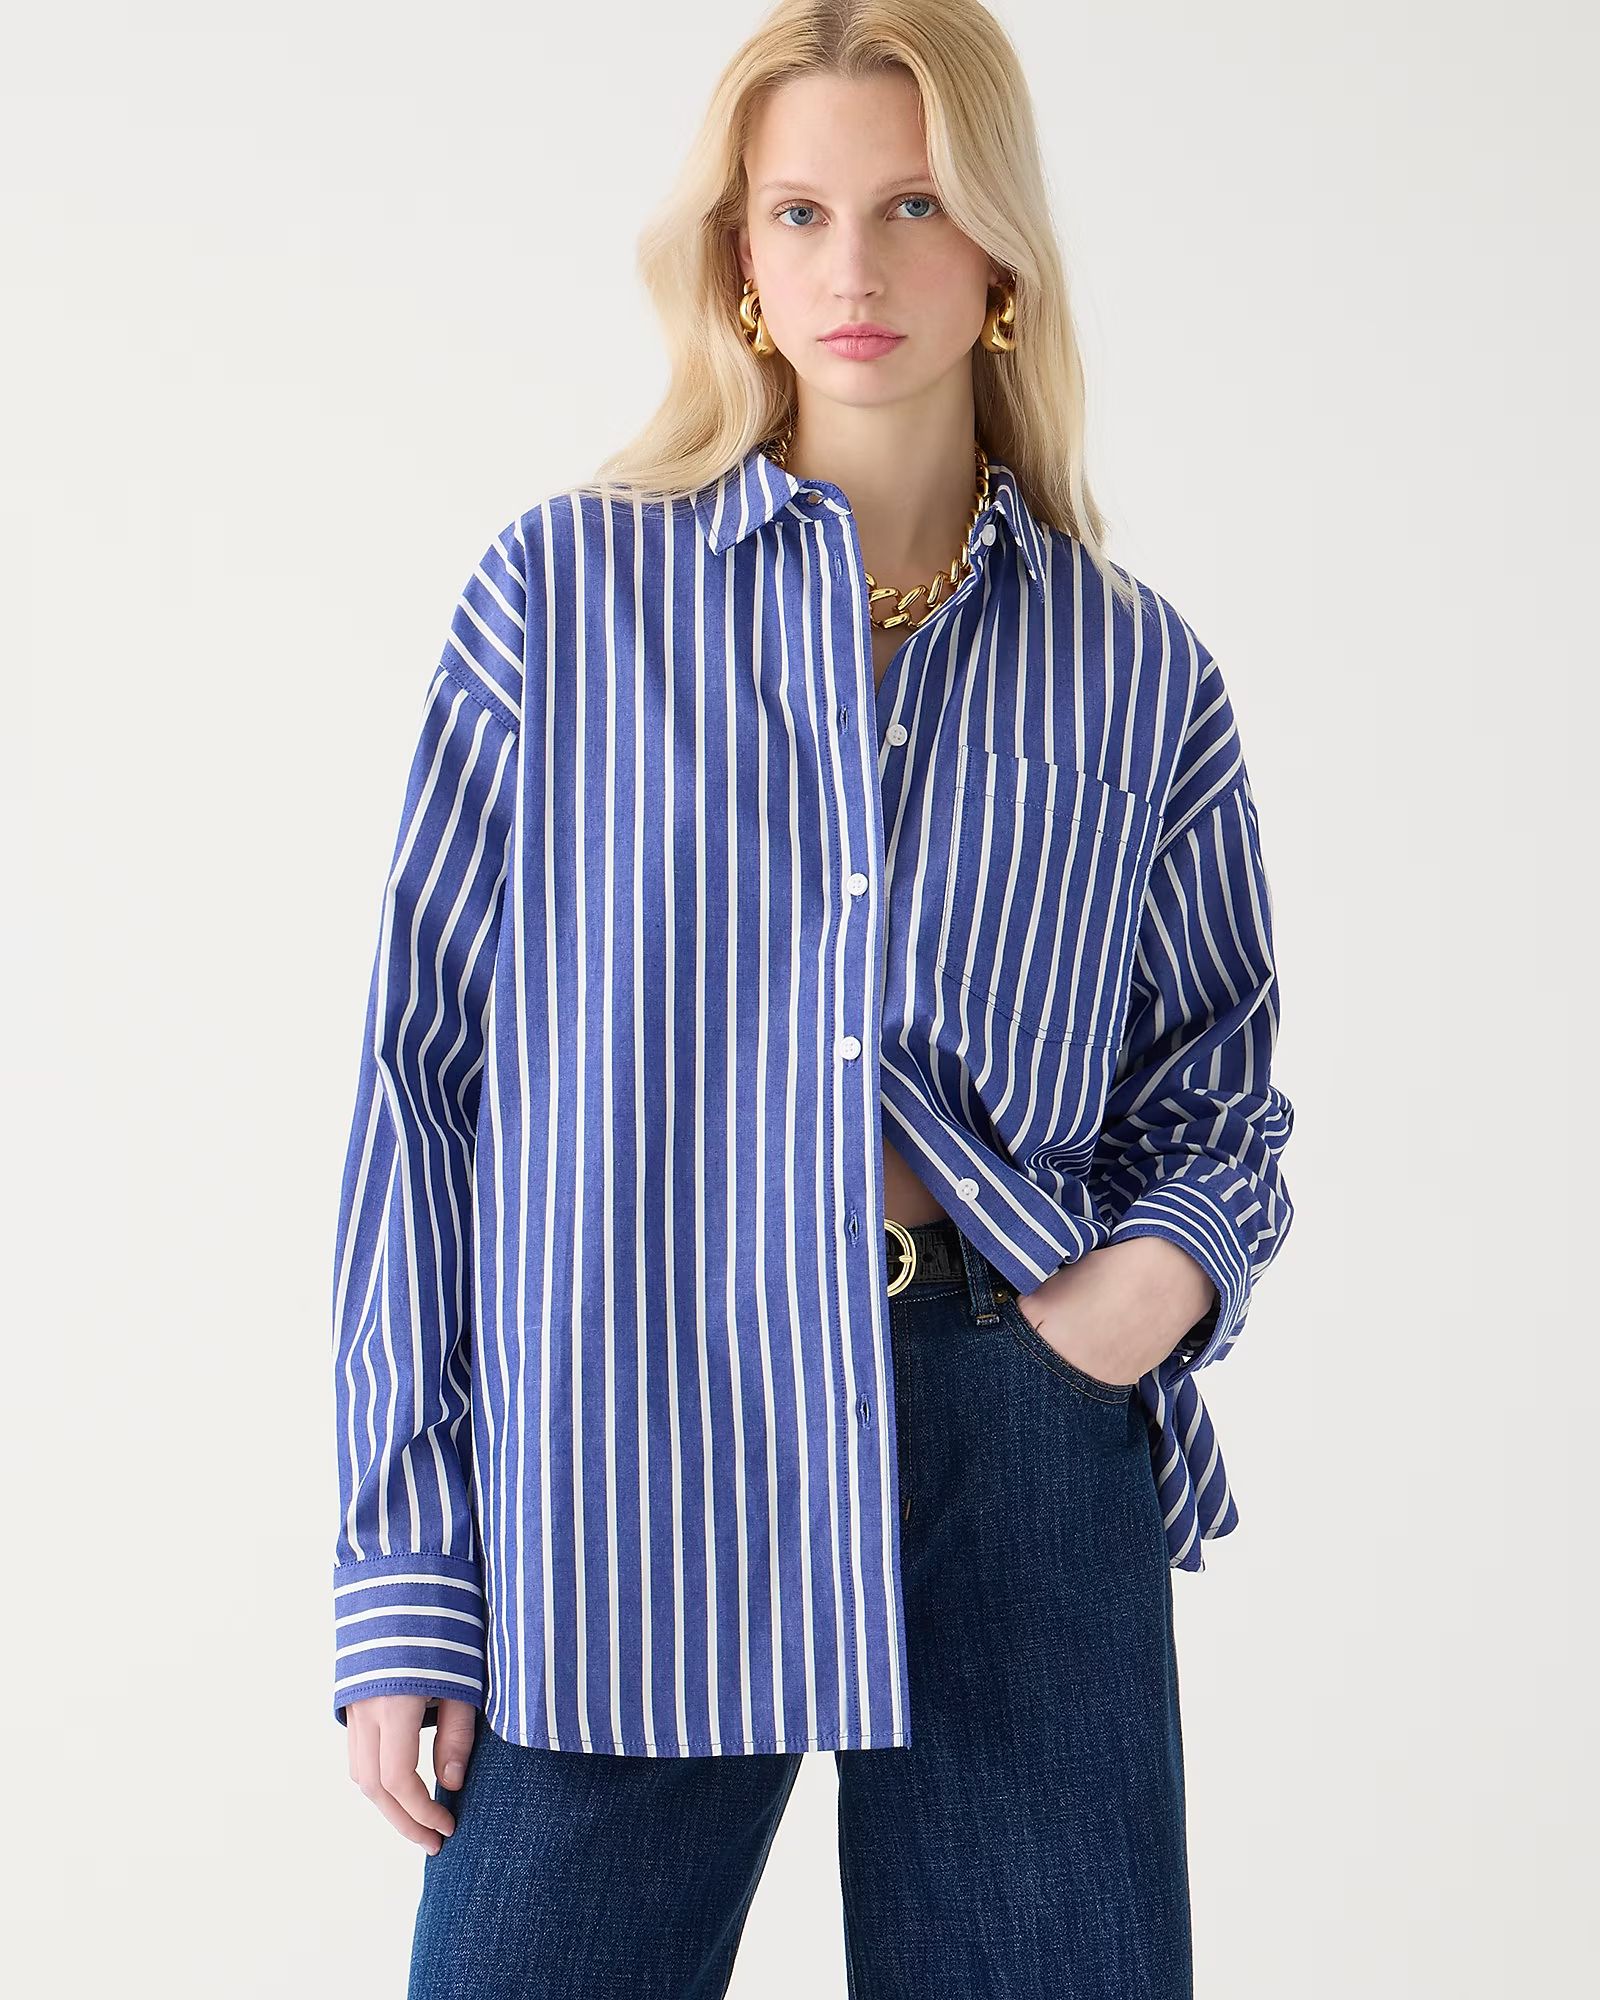 Étienne oversized shirt in striped lightweight oxford | J.Crew US